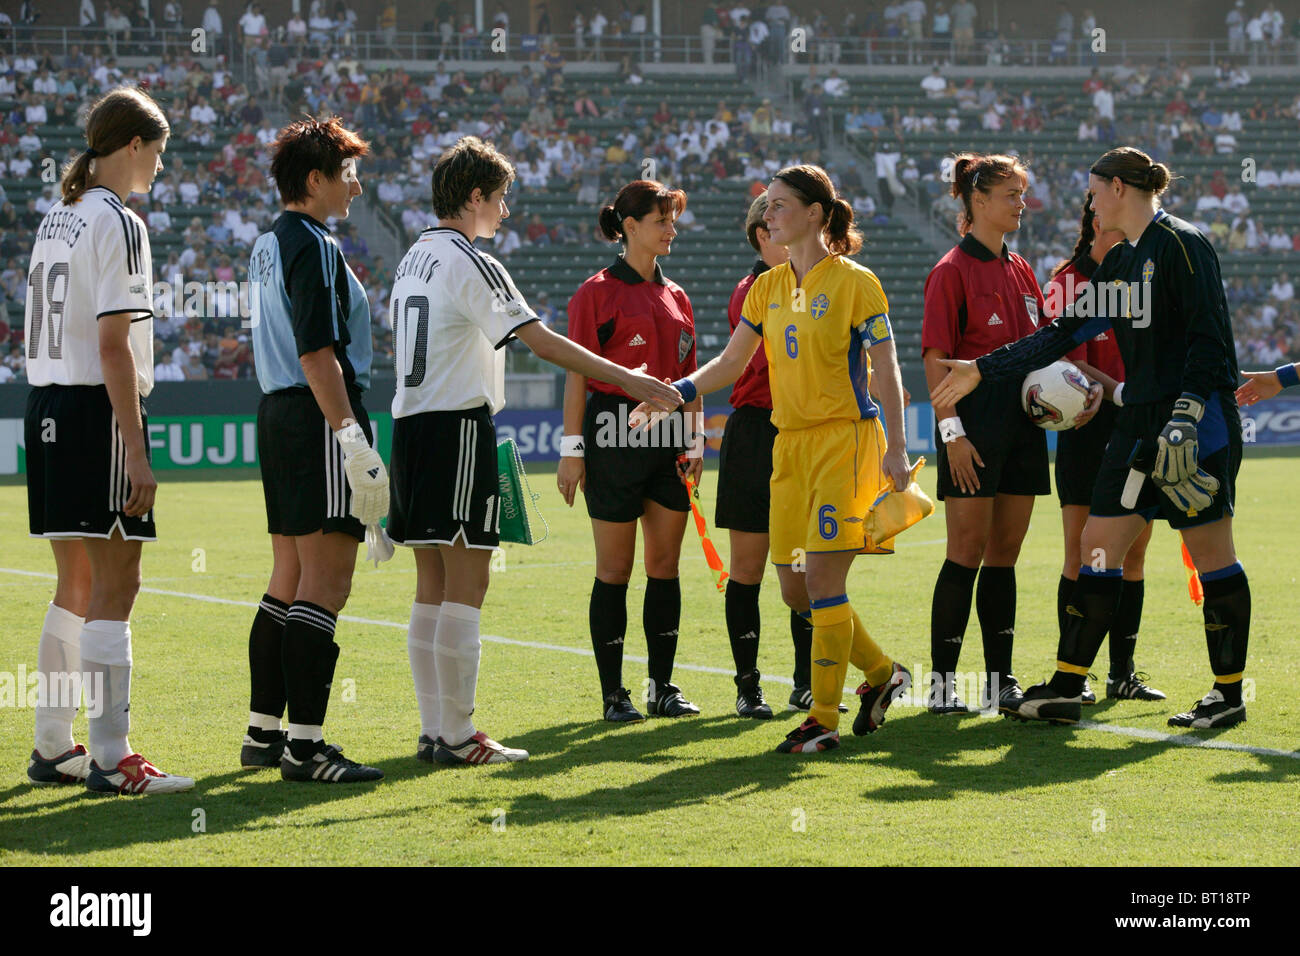 Germany team captain Bettina Wiegmann (10) shakes hands with Sweden captain Malin Mostrom (6) -  2003 Women's World Cup final. Stock Photo